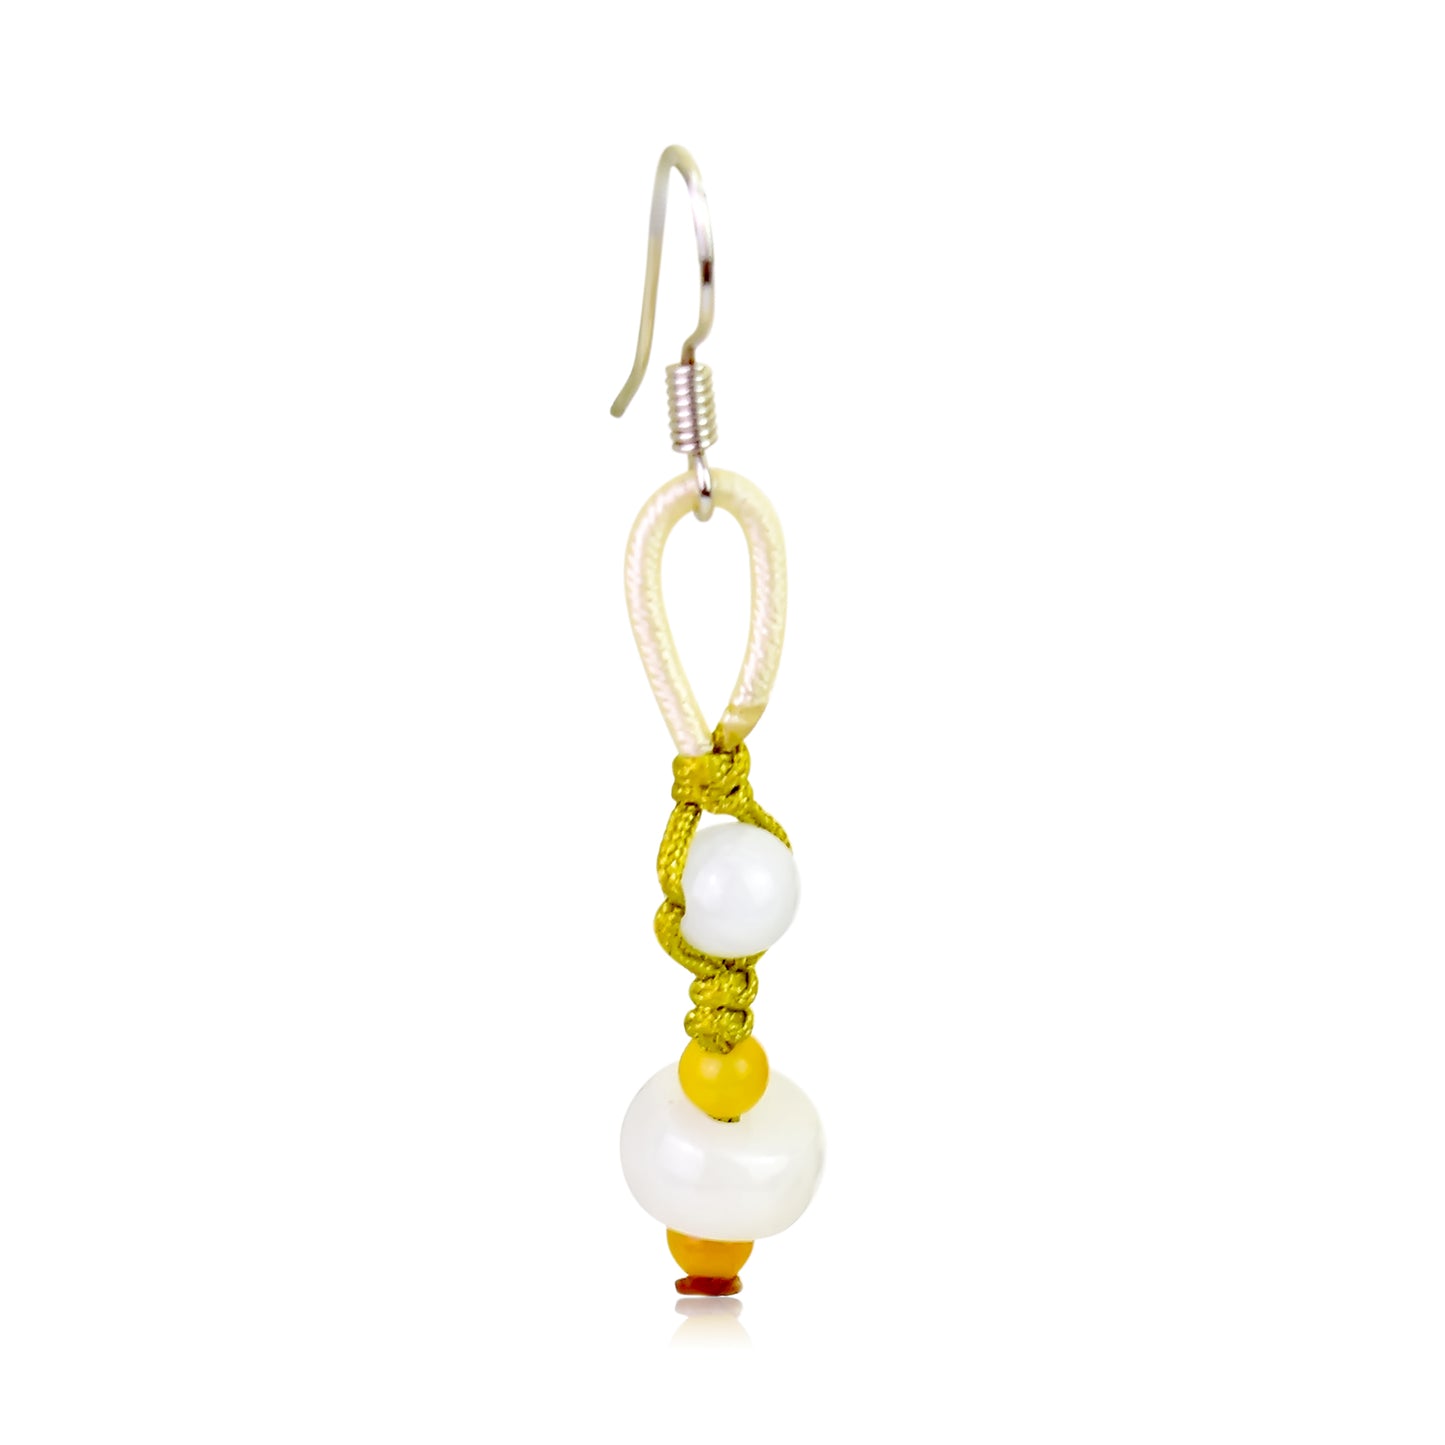 Adorn Yourself with Beautiful Spherical Jade Beads Handmade Earrings made with Yellow Cord